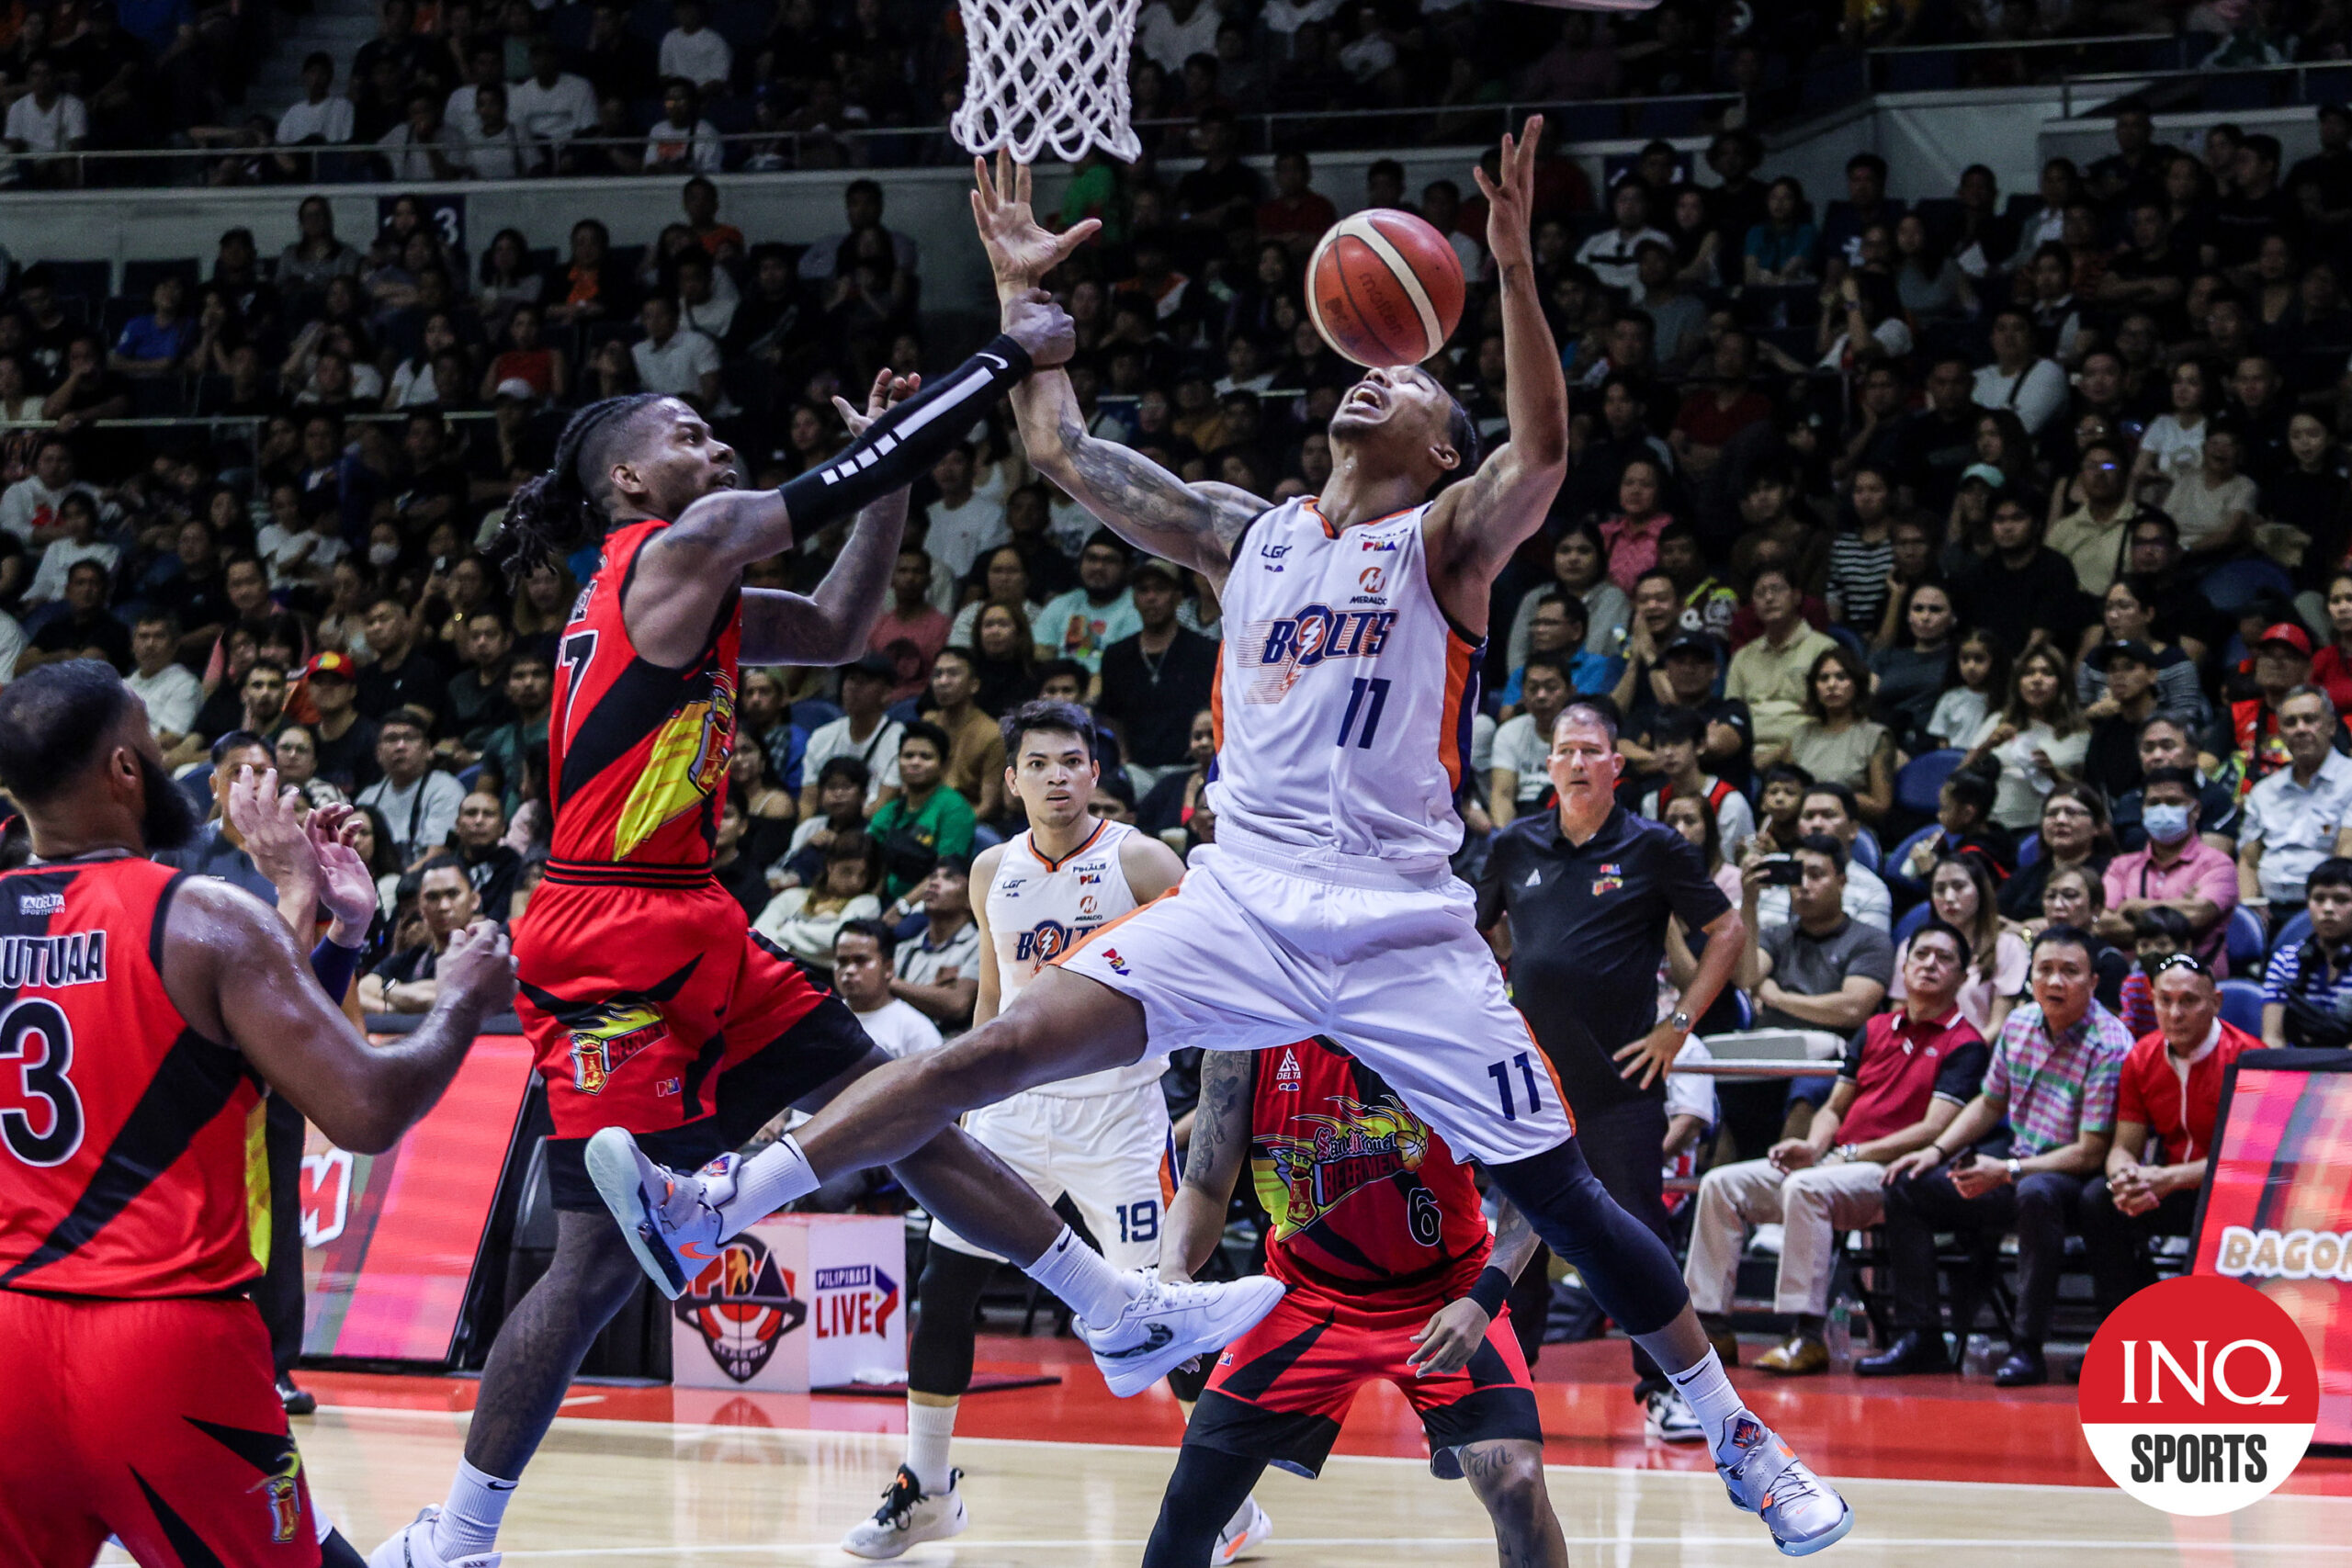 Meralco Bolts' Chris Newsome during the PBA Finals Game 1 against San Miguel Beermen